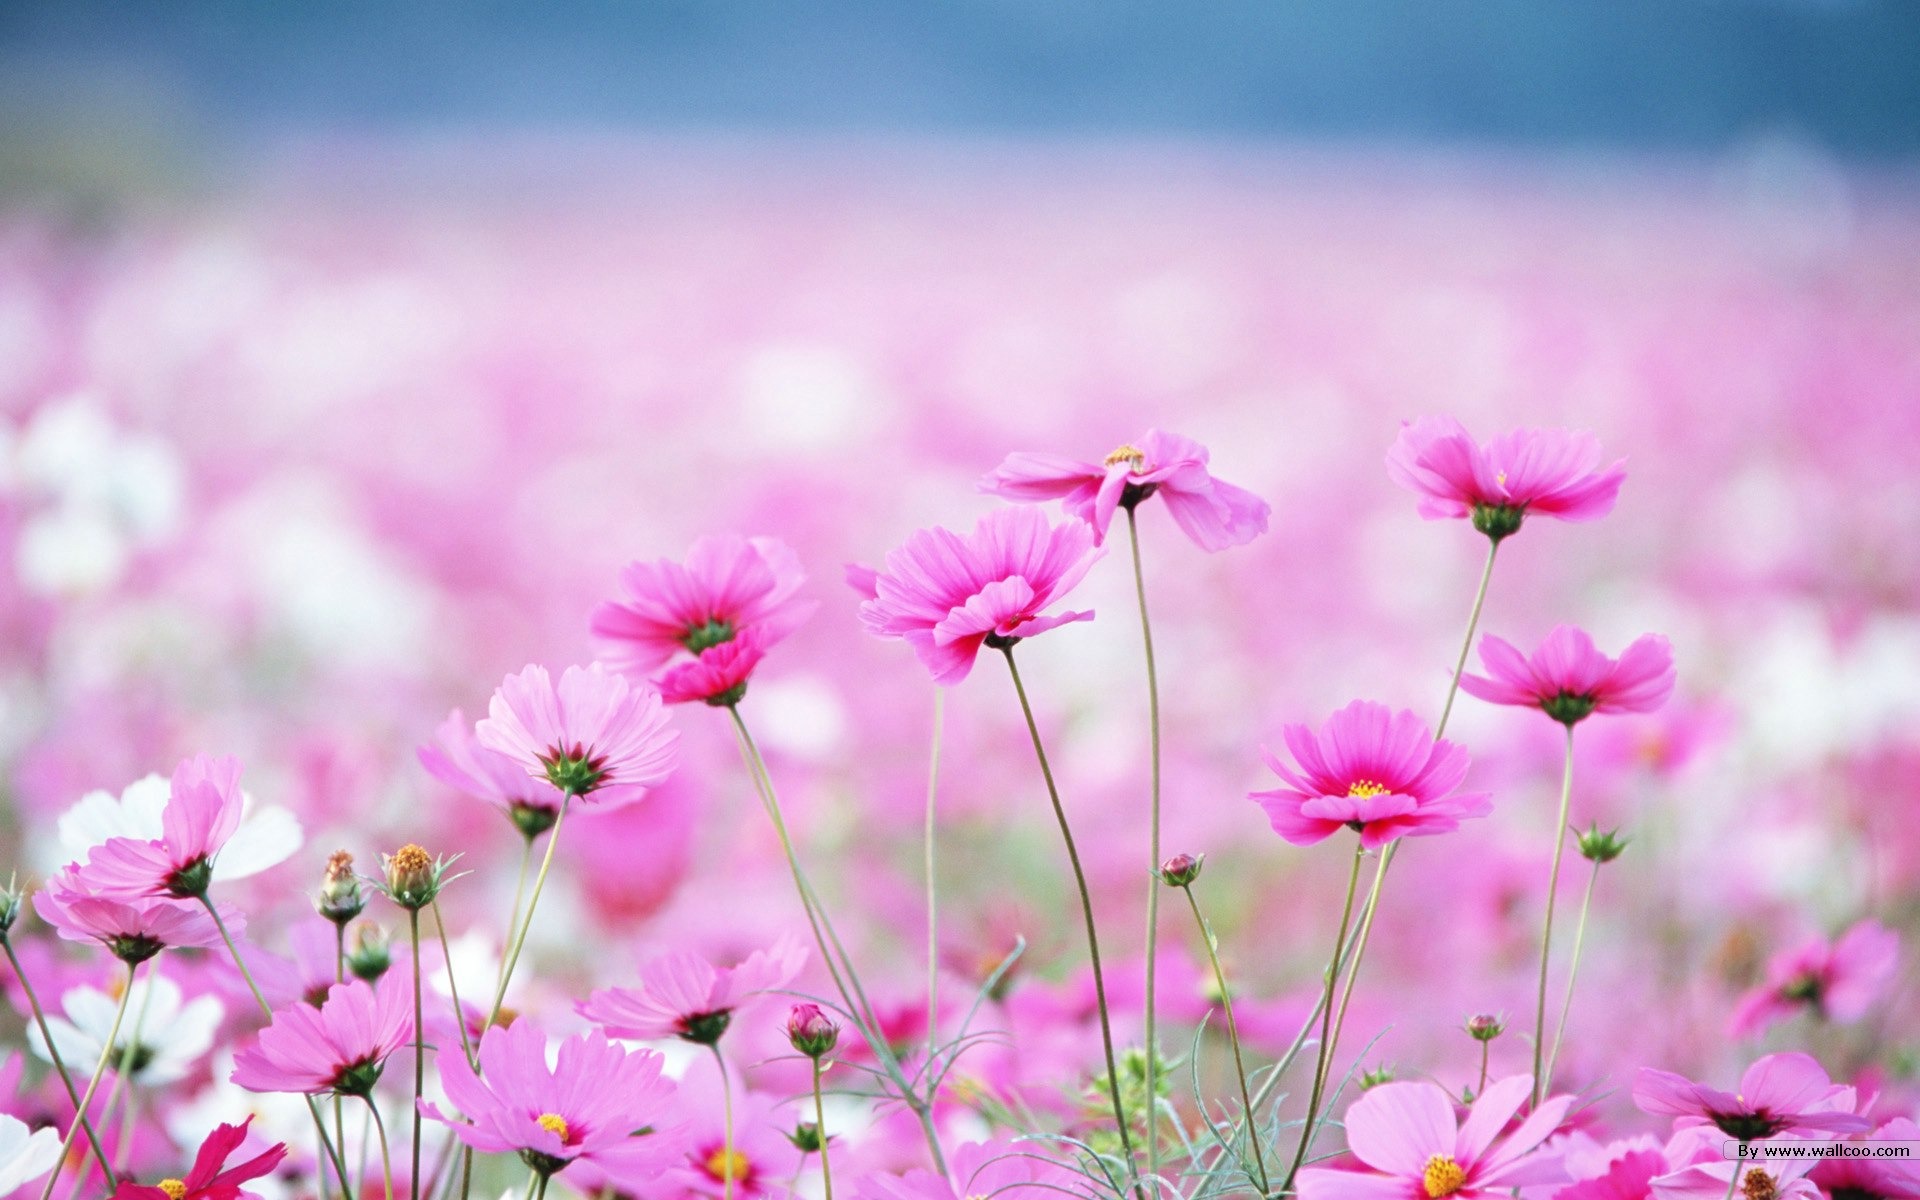 Fresh style Flowers Wallpapers #23 - 1920x1200